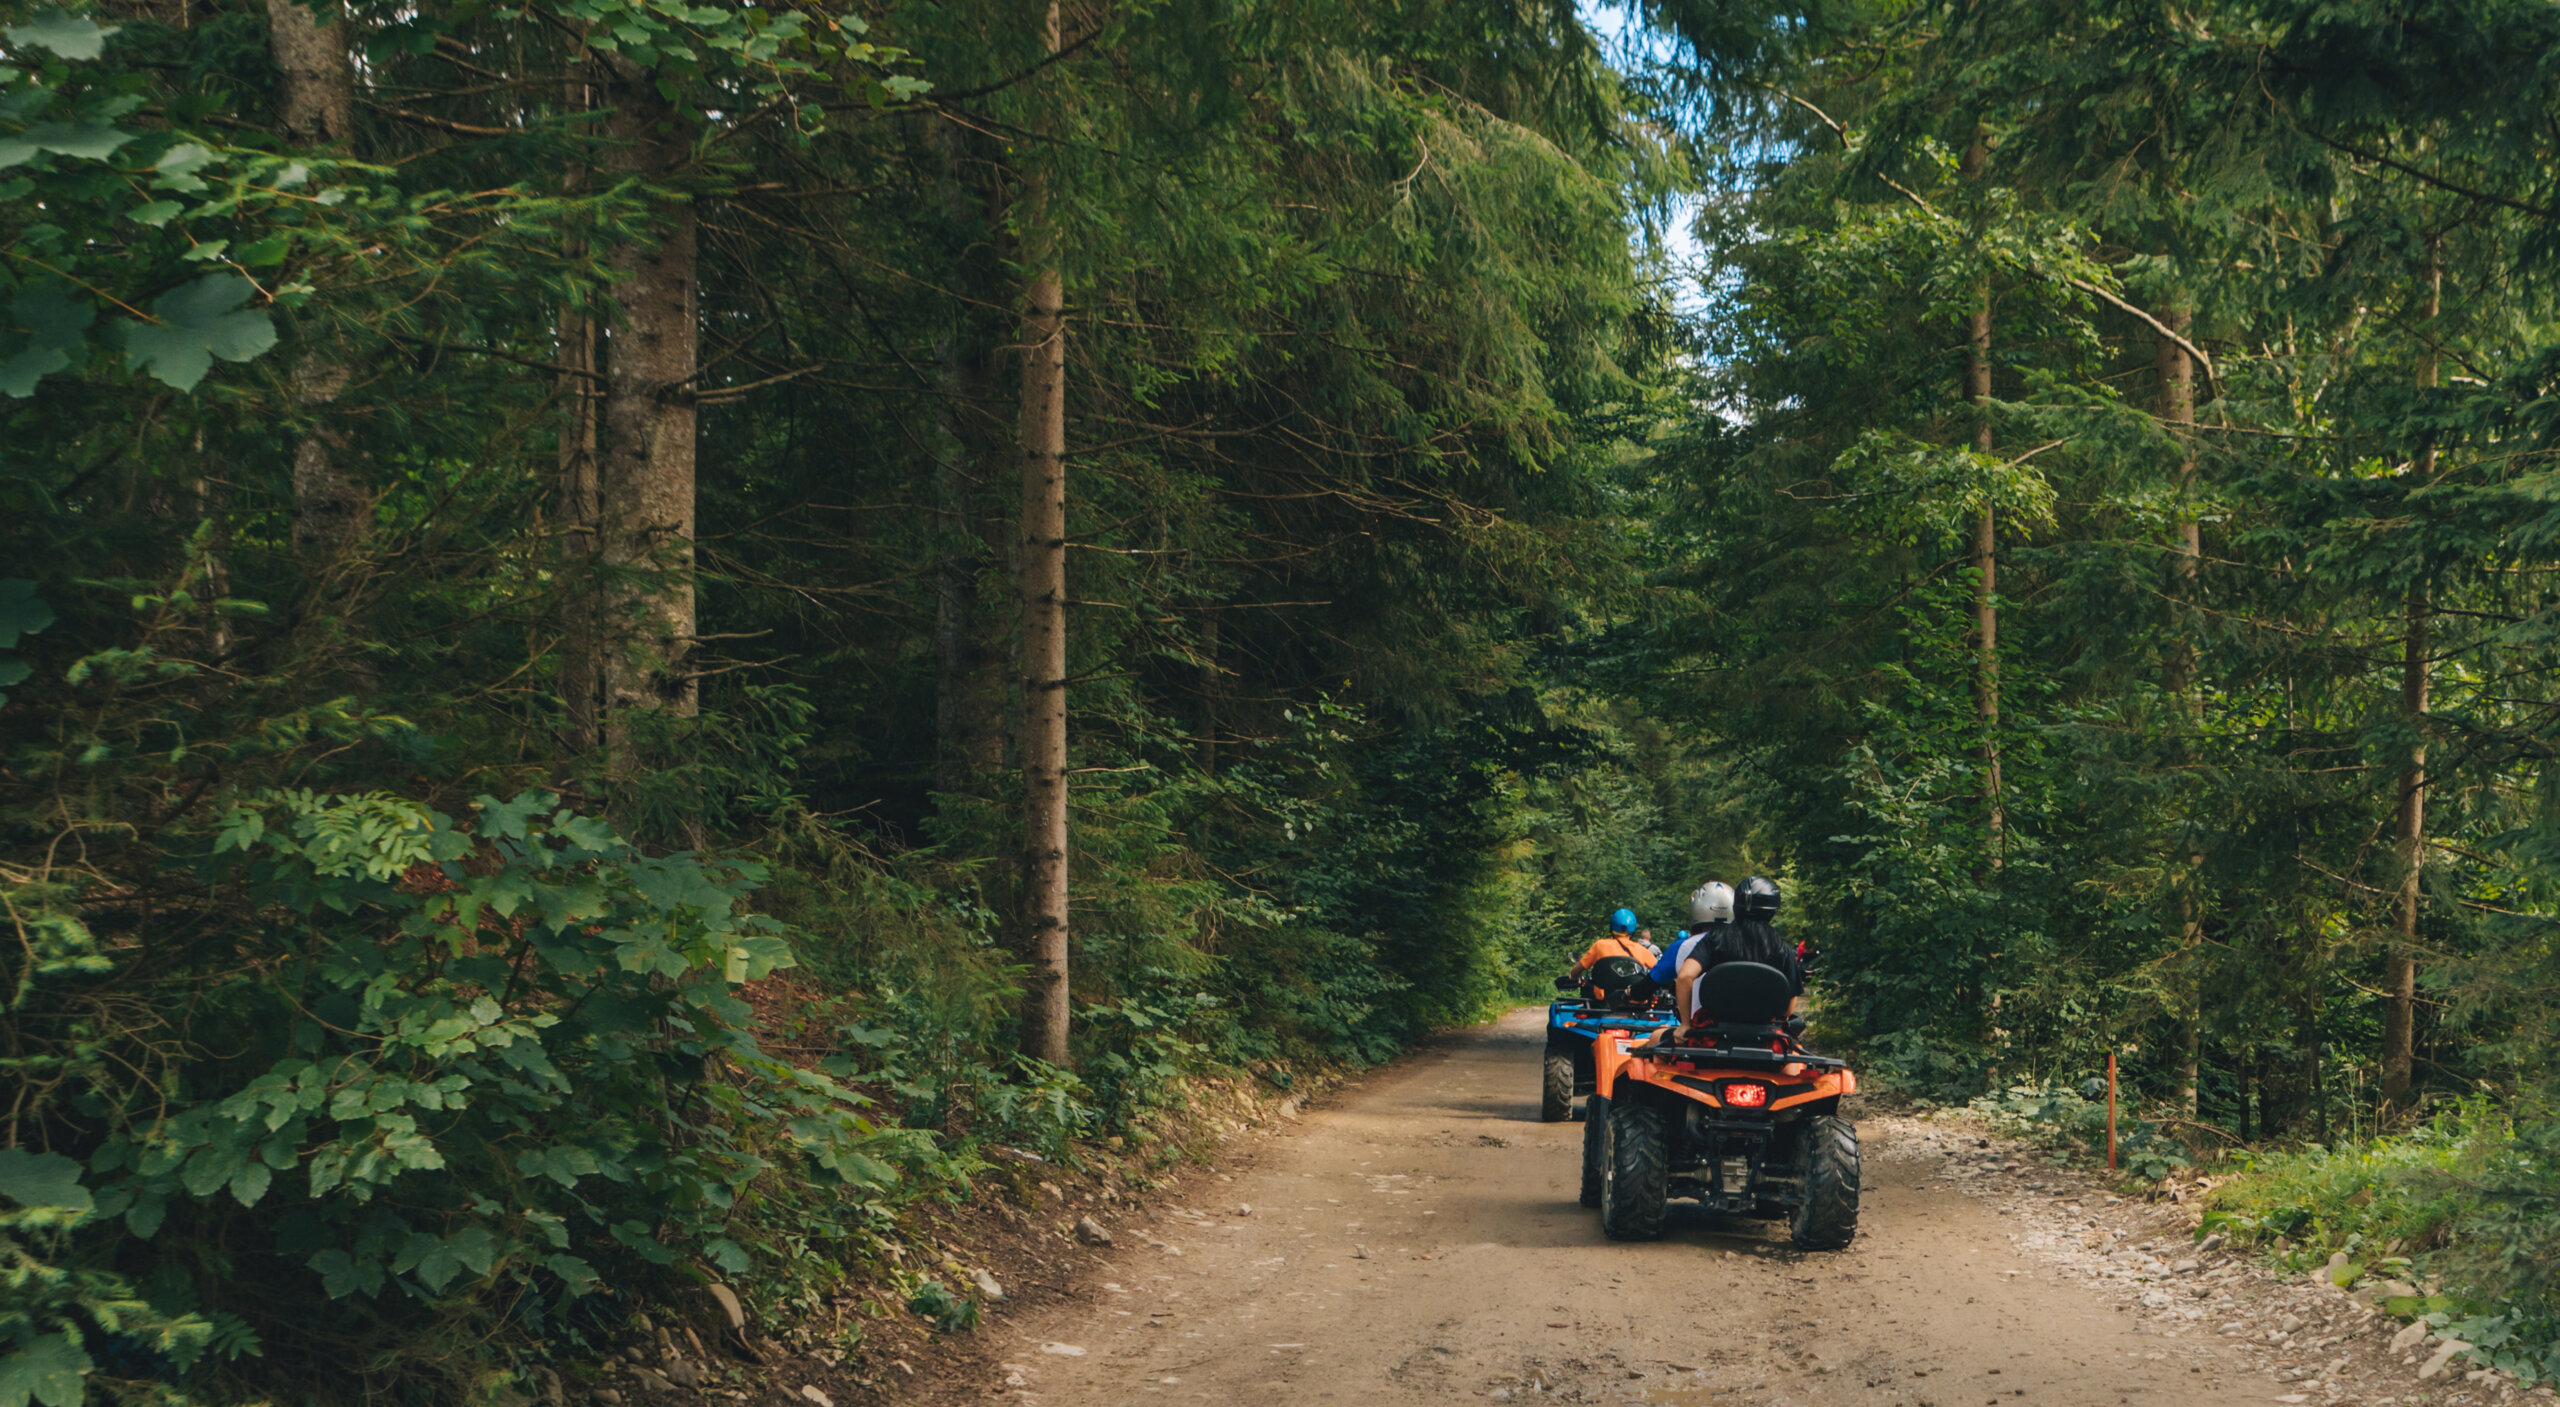 People riding down a trail in ATVs in a forest.